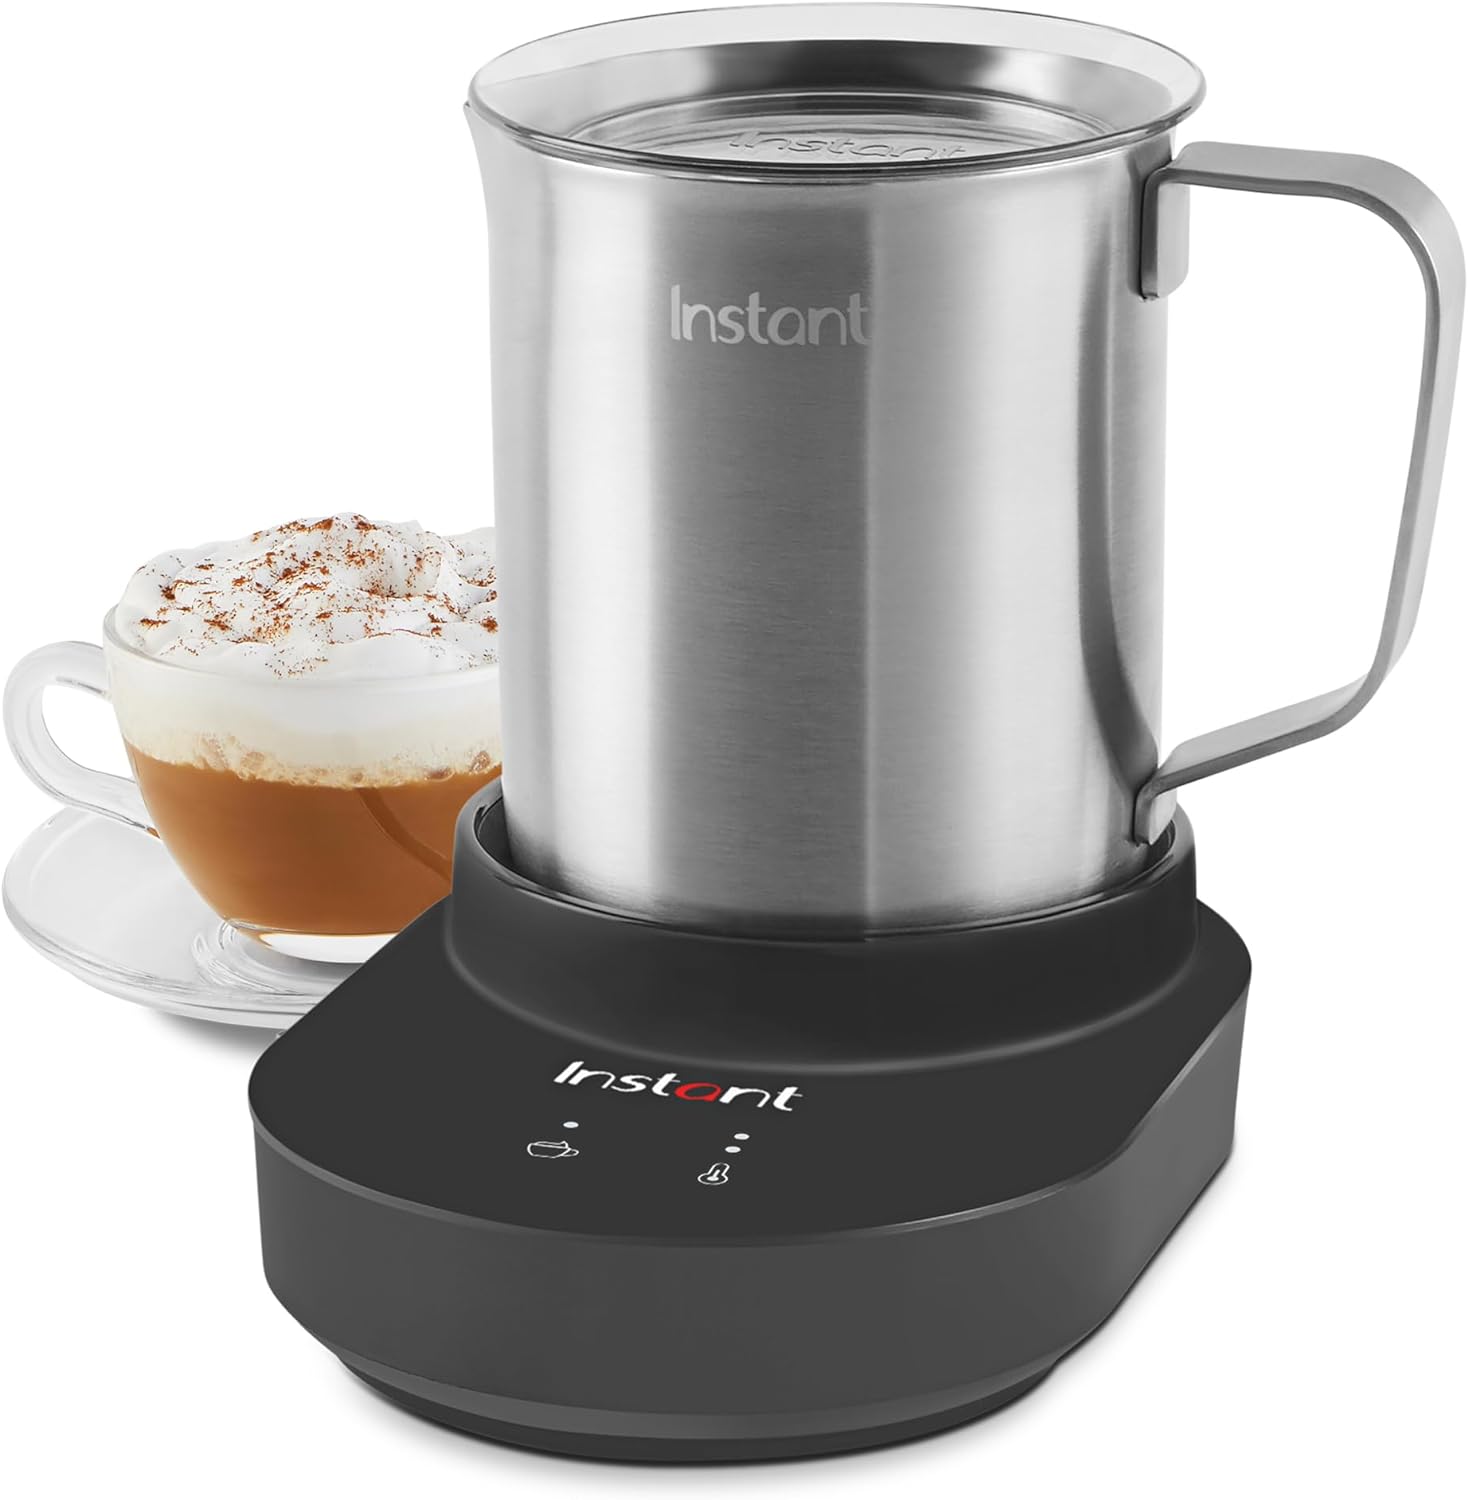 Instant Pot Instant Magic Froth 9-in-1 Electric Milk Steamer and Frother,17oz Stainless Steel Pitcher,Hot and Cold Foam Maker and Milk Warmer for Lattes,Cappuccinos,Macchiato